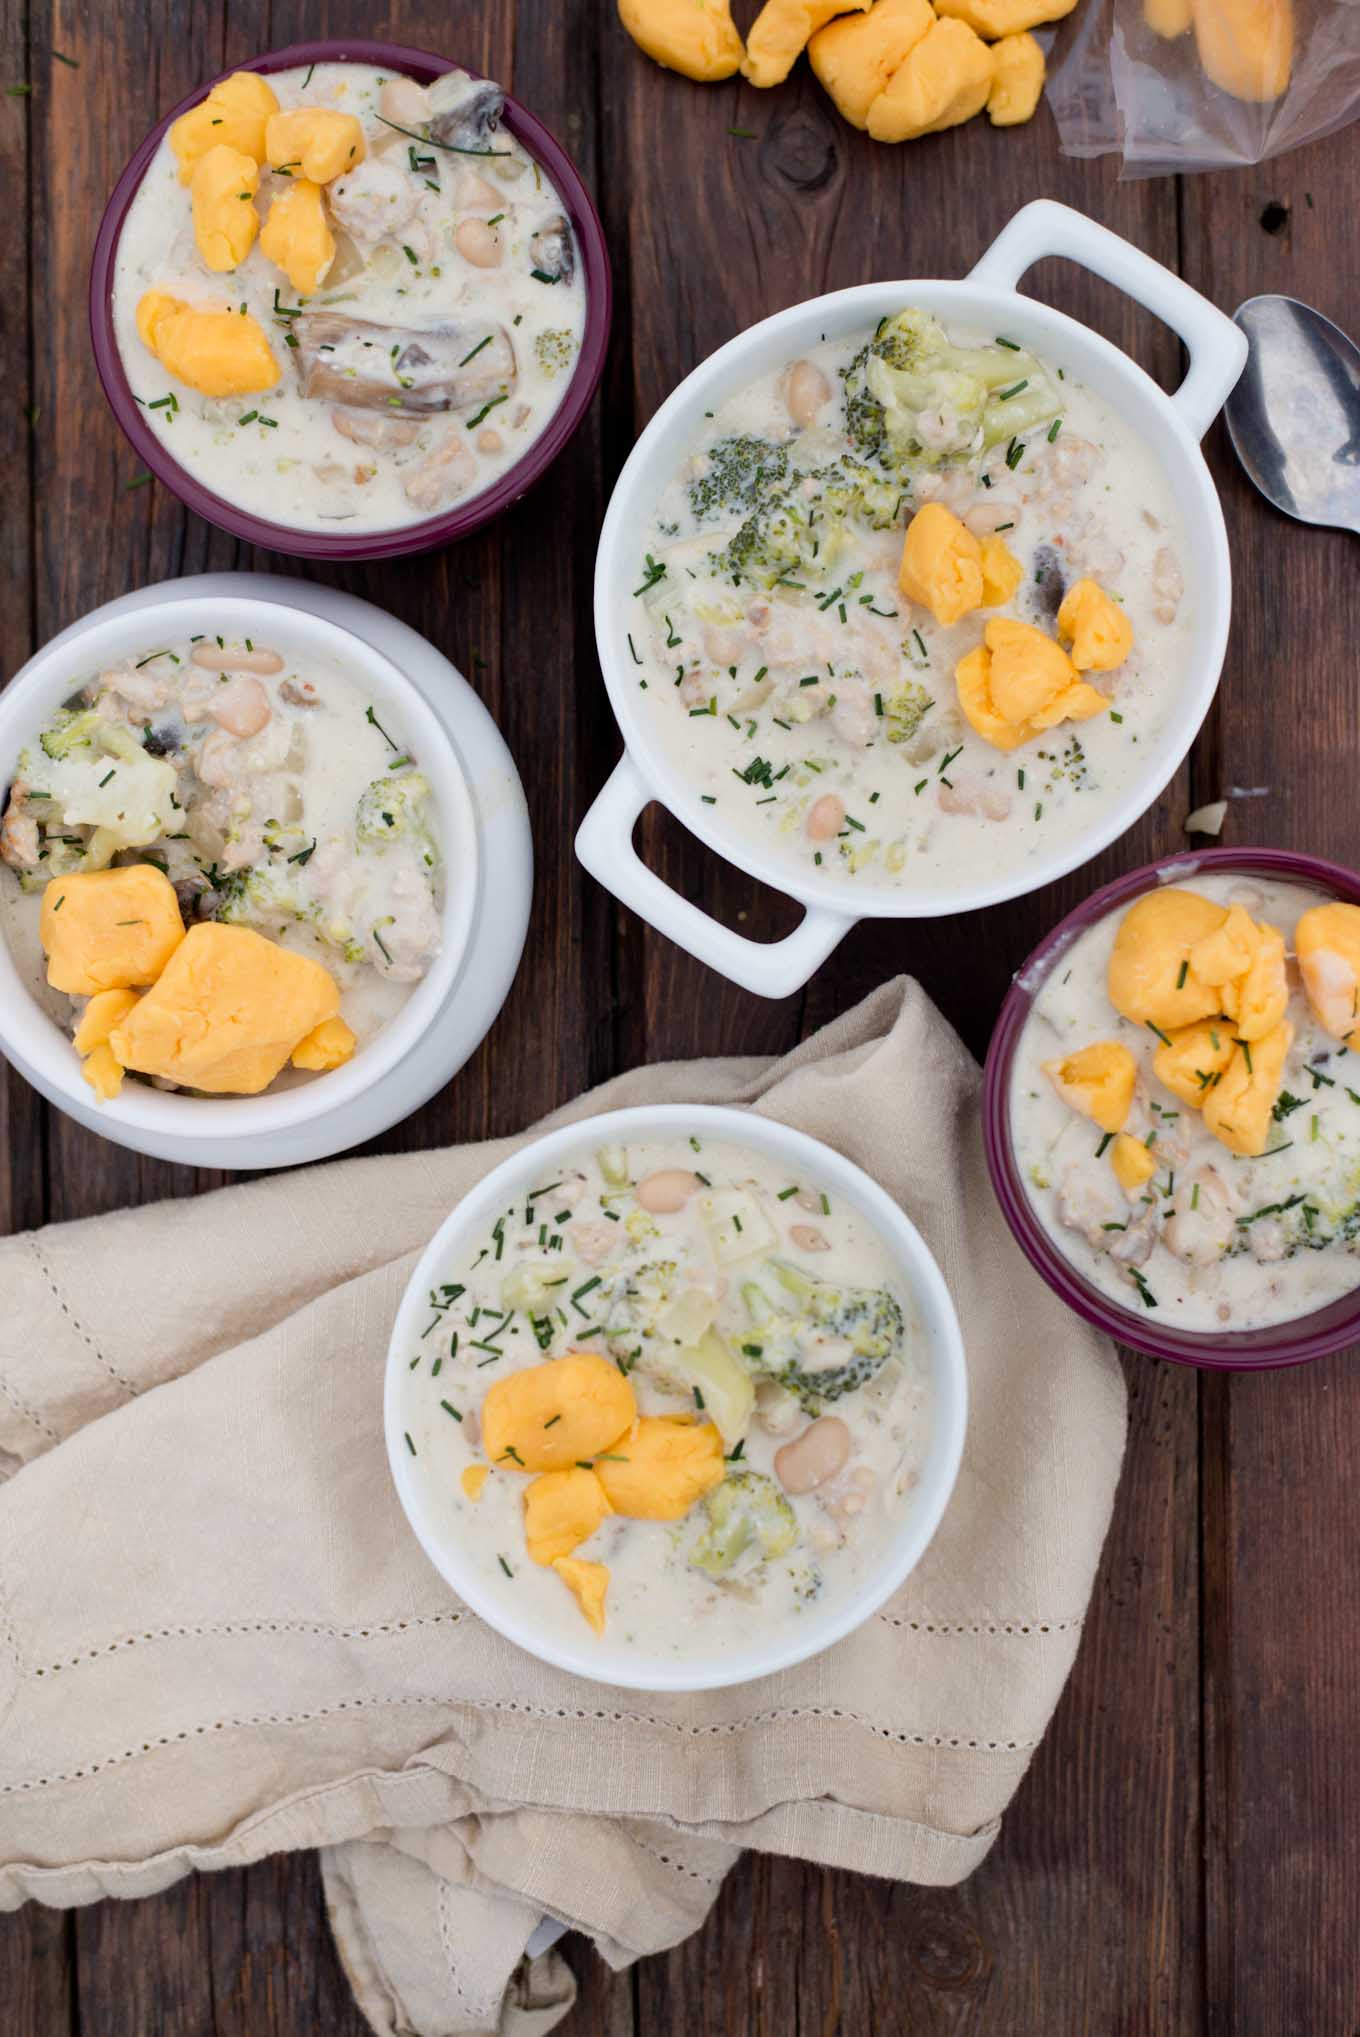 Creamy and delicious this healthified version of broccoli cheddar soup has half the cheese and extra protein.